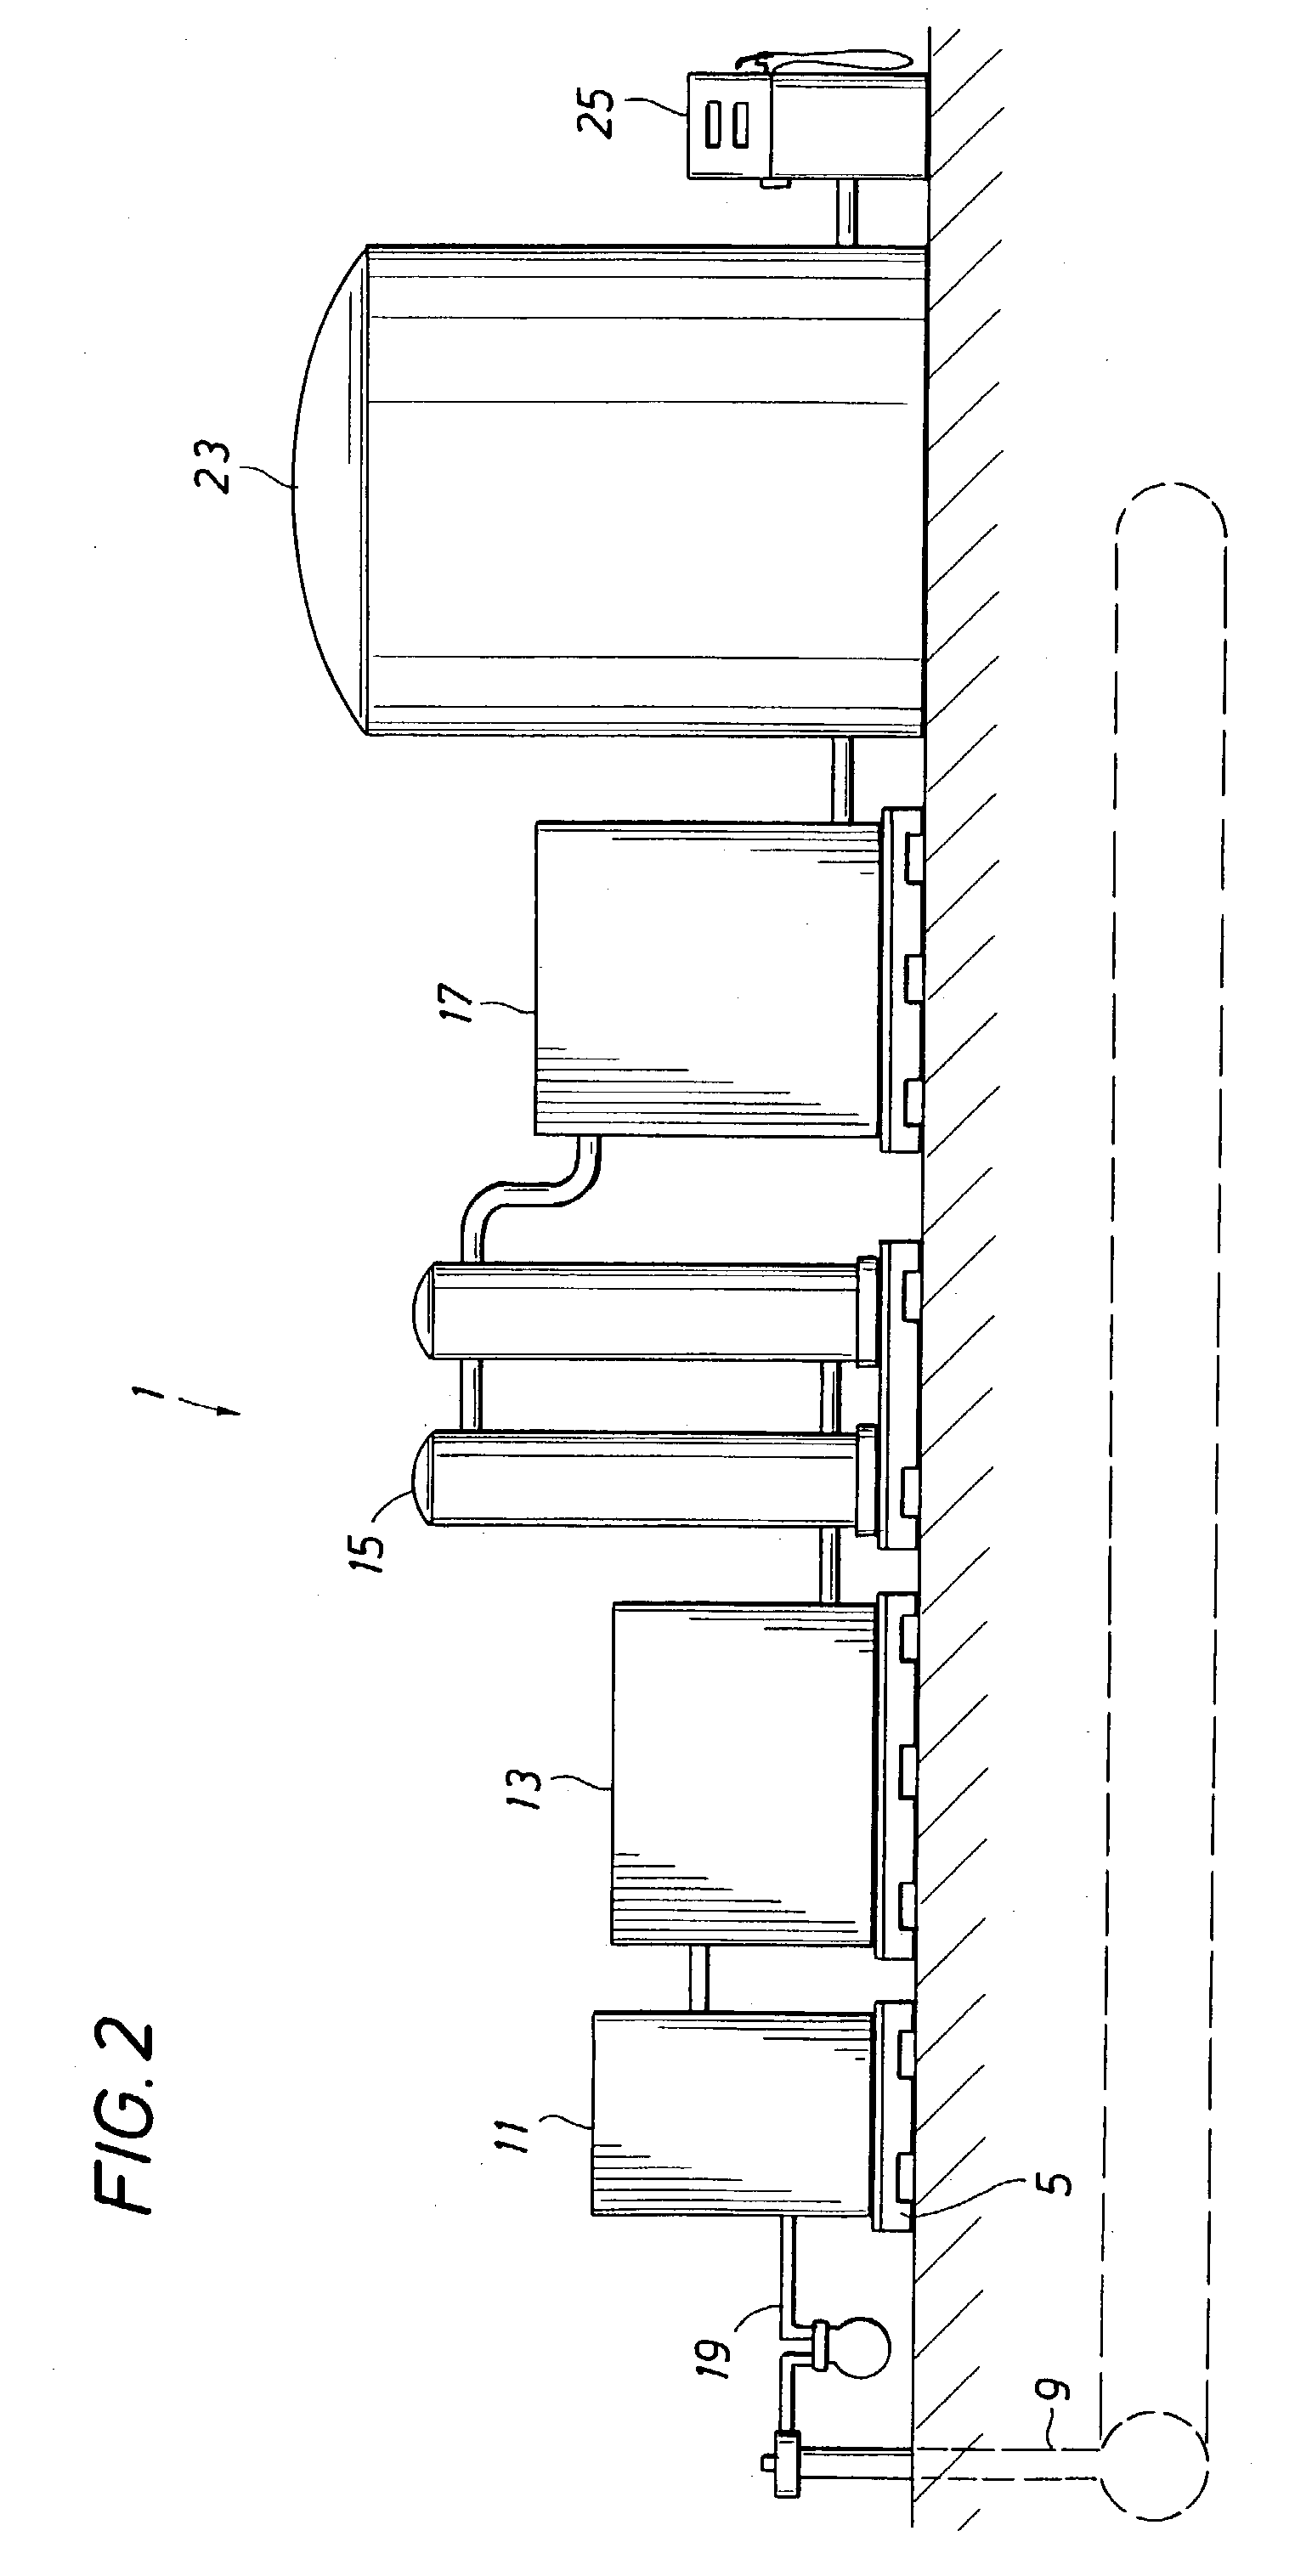 Portable gas-to-liquids unit and method for capturing natural gas at remote locations